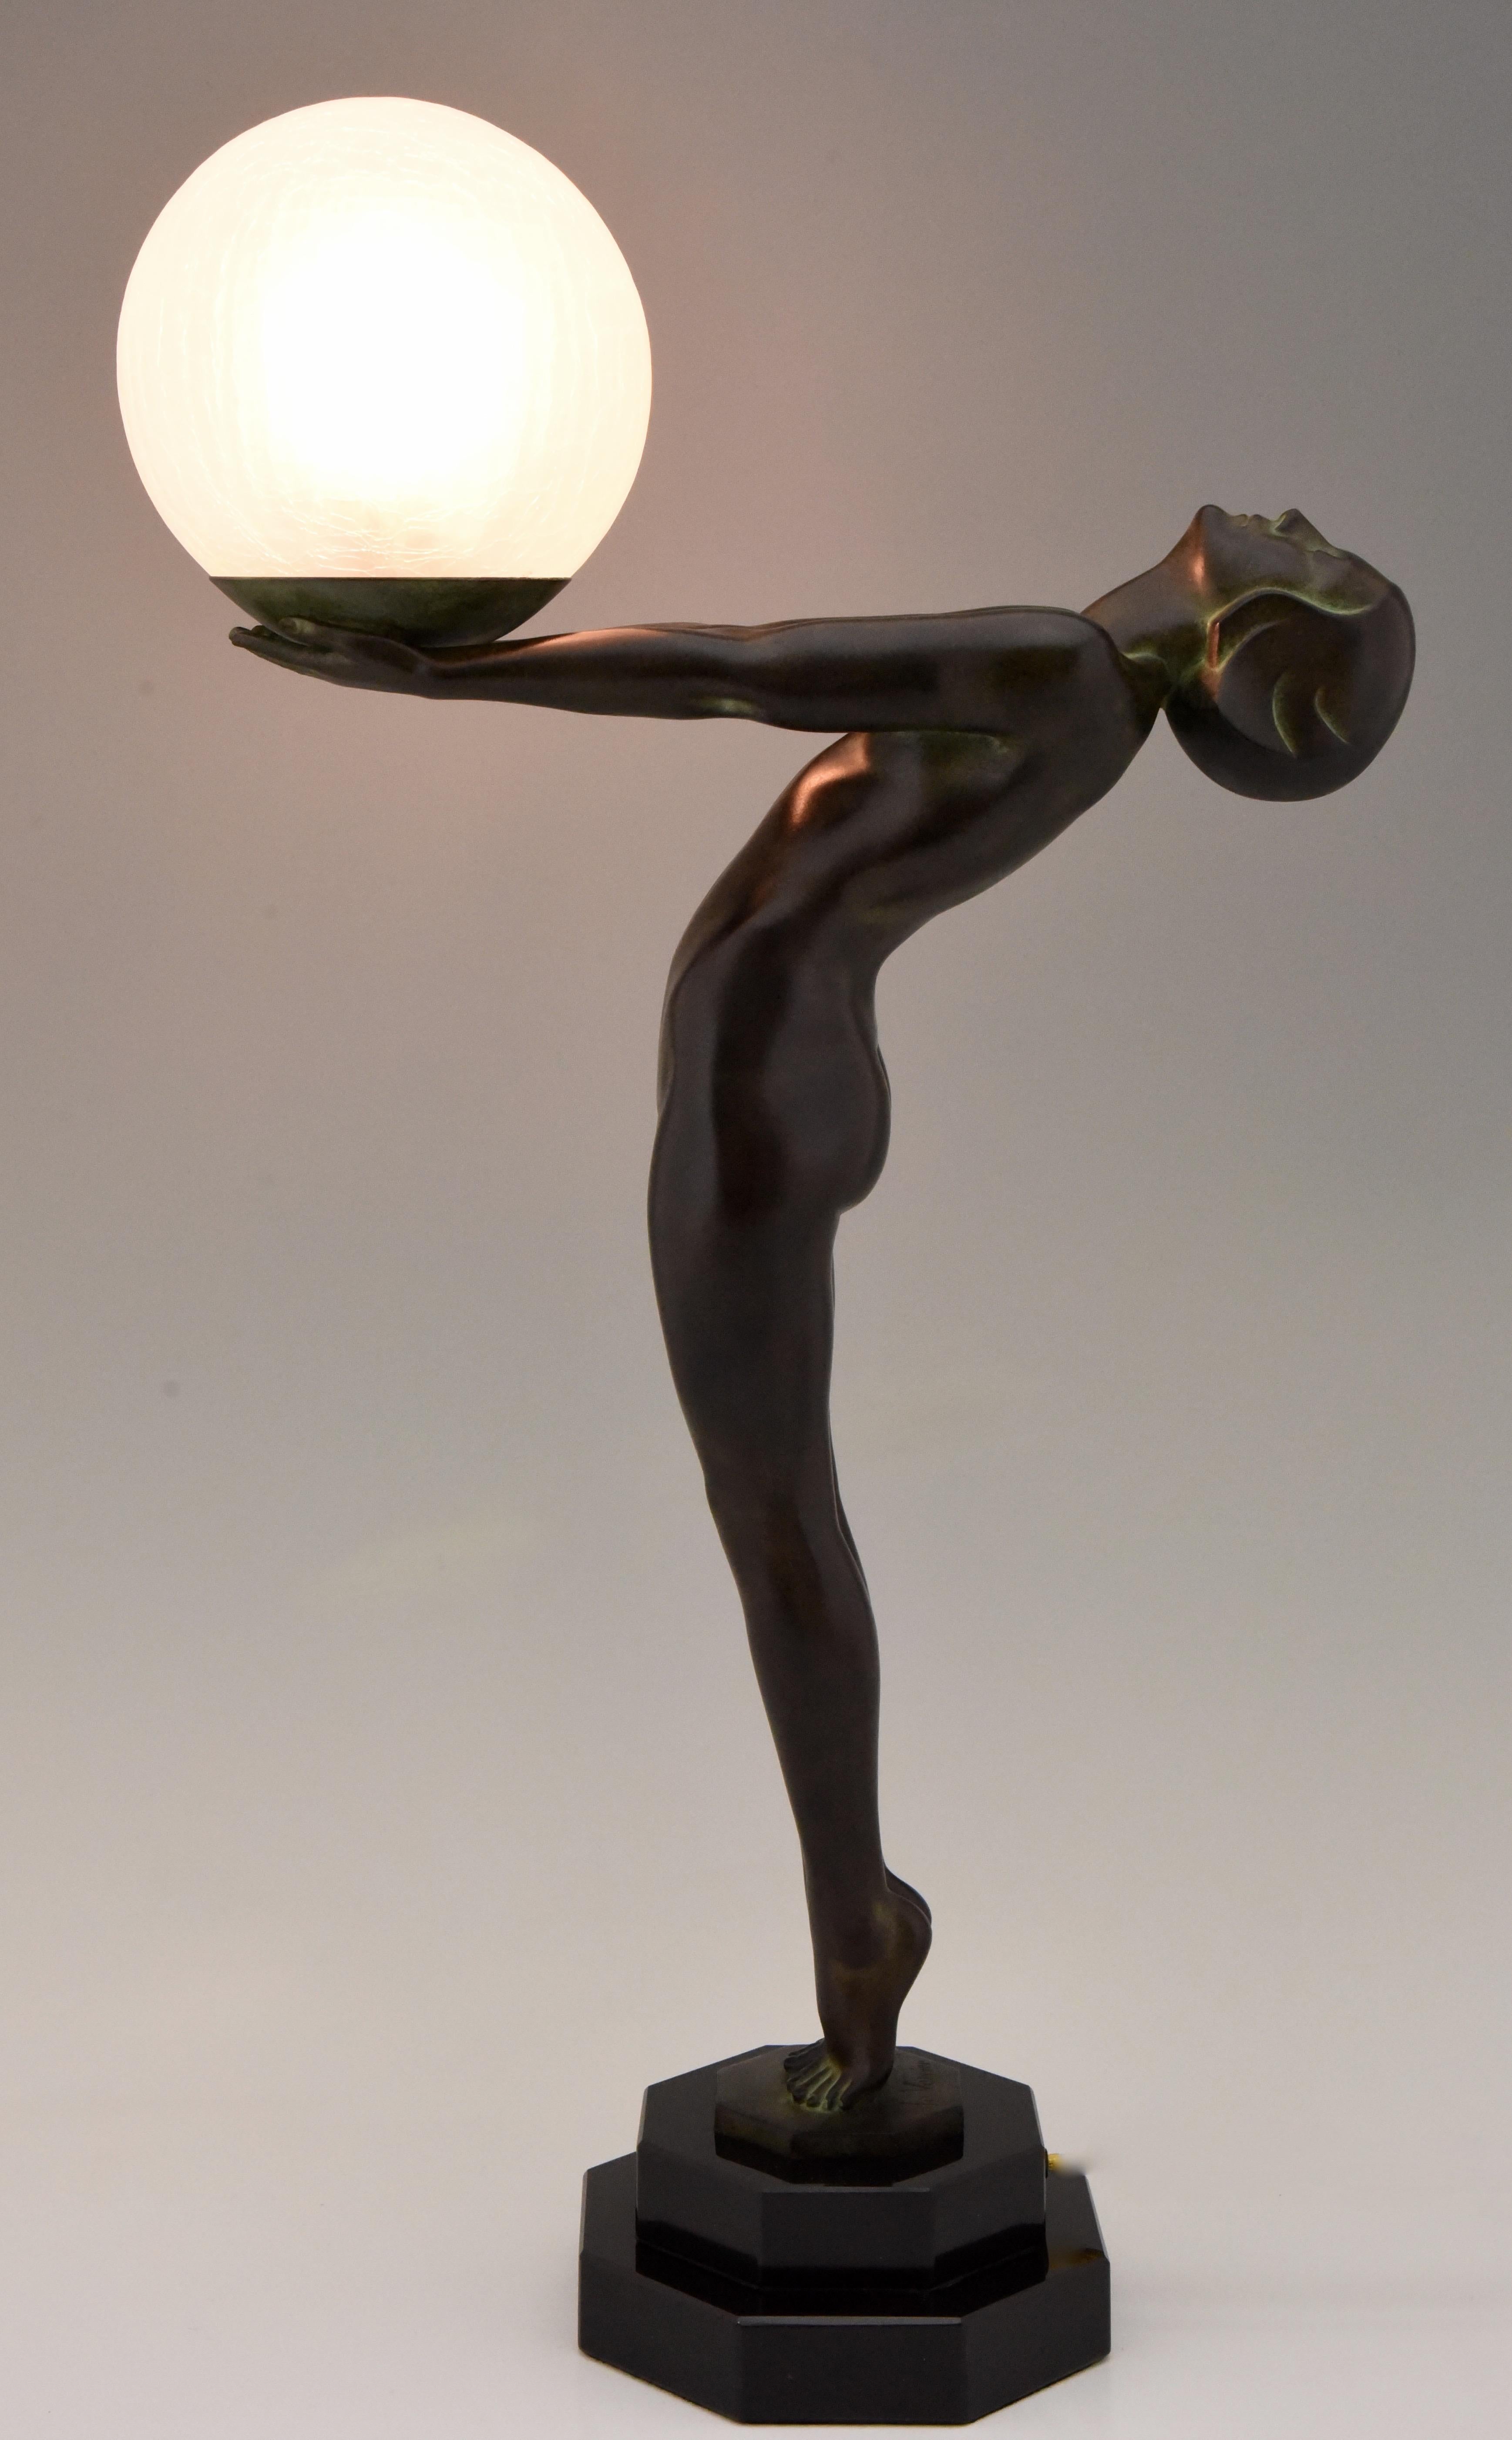 Impressive Art Deco figural table lamp of a standing nude holding a glass shade, CLarté, Lumina.
Measures: H. 65 cm or 25.6 inch tall.
Designed by Max Le Verrier in France, 1928.
Original posthumous contemporary cast at the Le Verrier foundry.